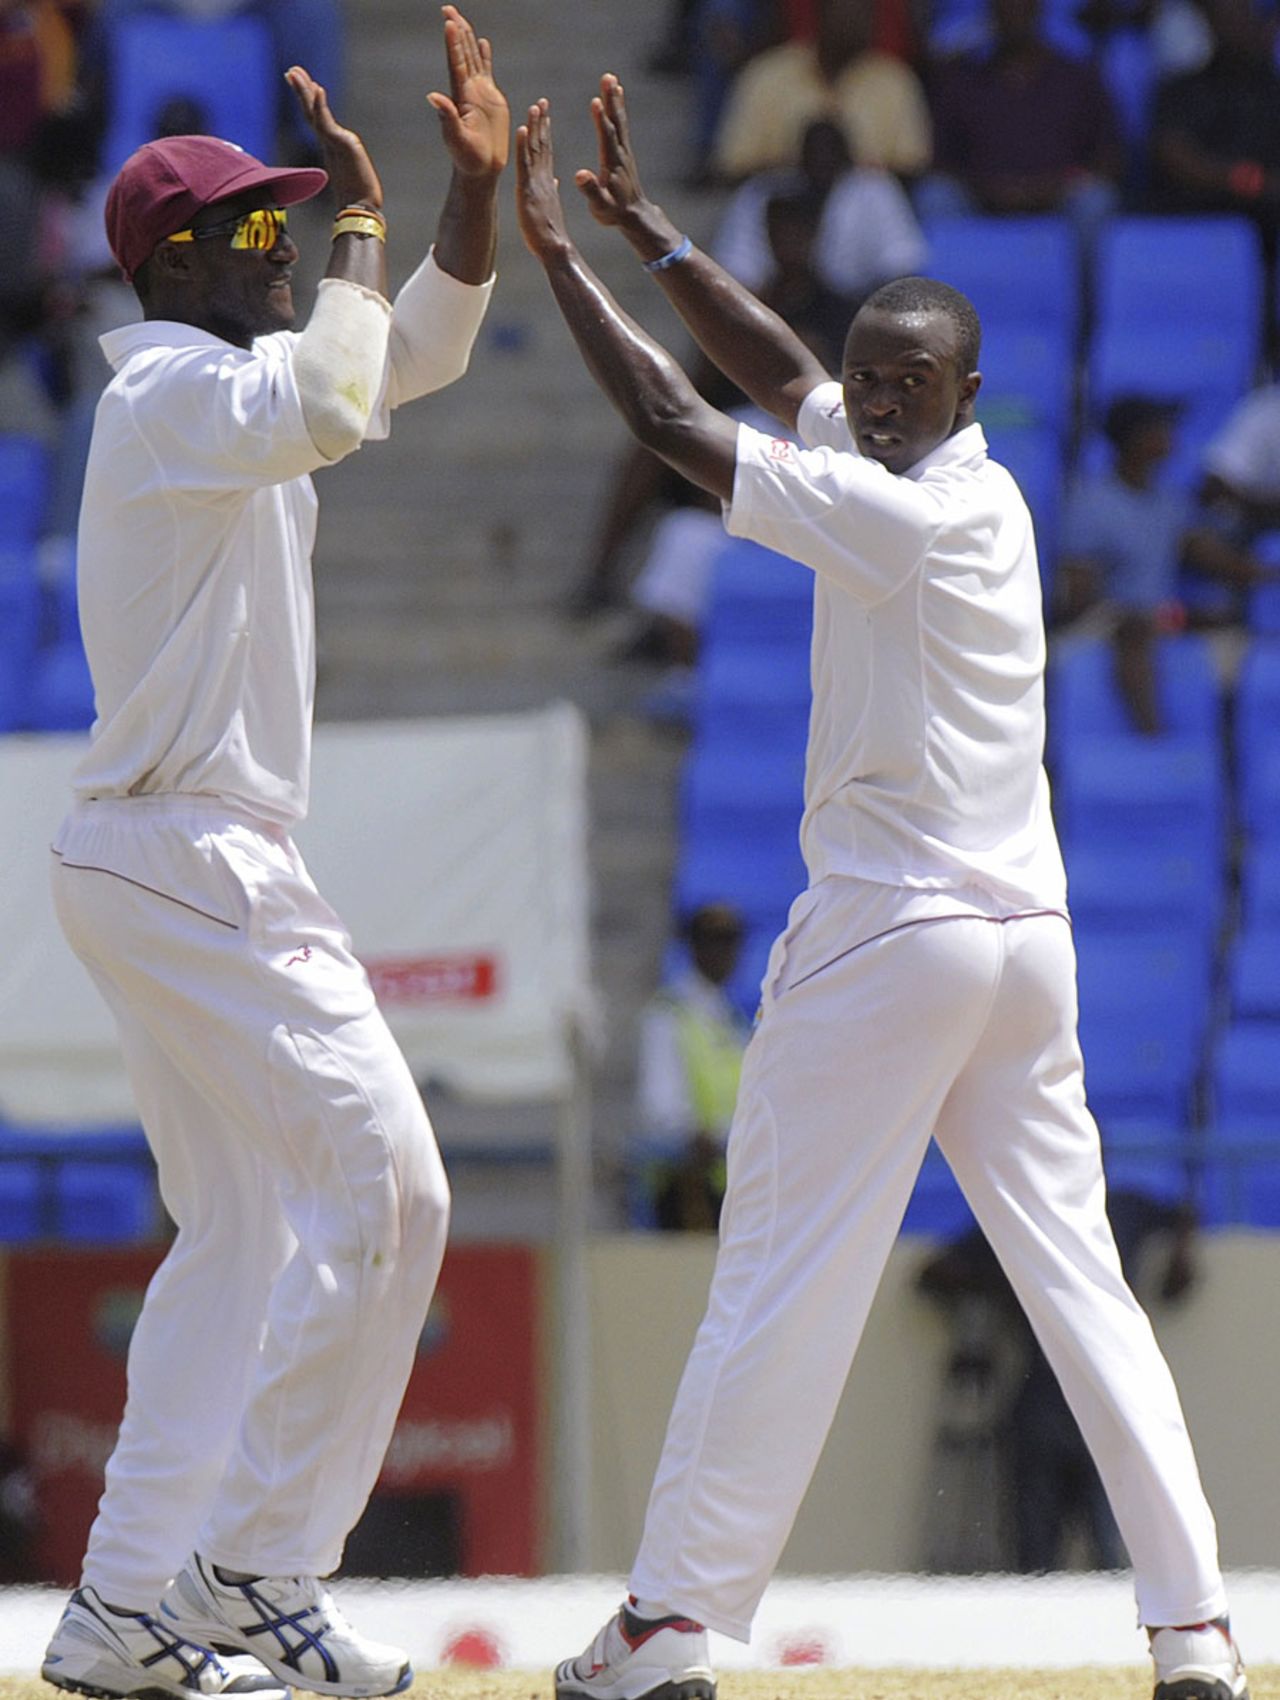 Kemar Roach celebrates one of his five wickets with Darren Sammy, West Indies v New Zealand, 1st Test, Antigua, 5th day, July 29, 2012